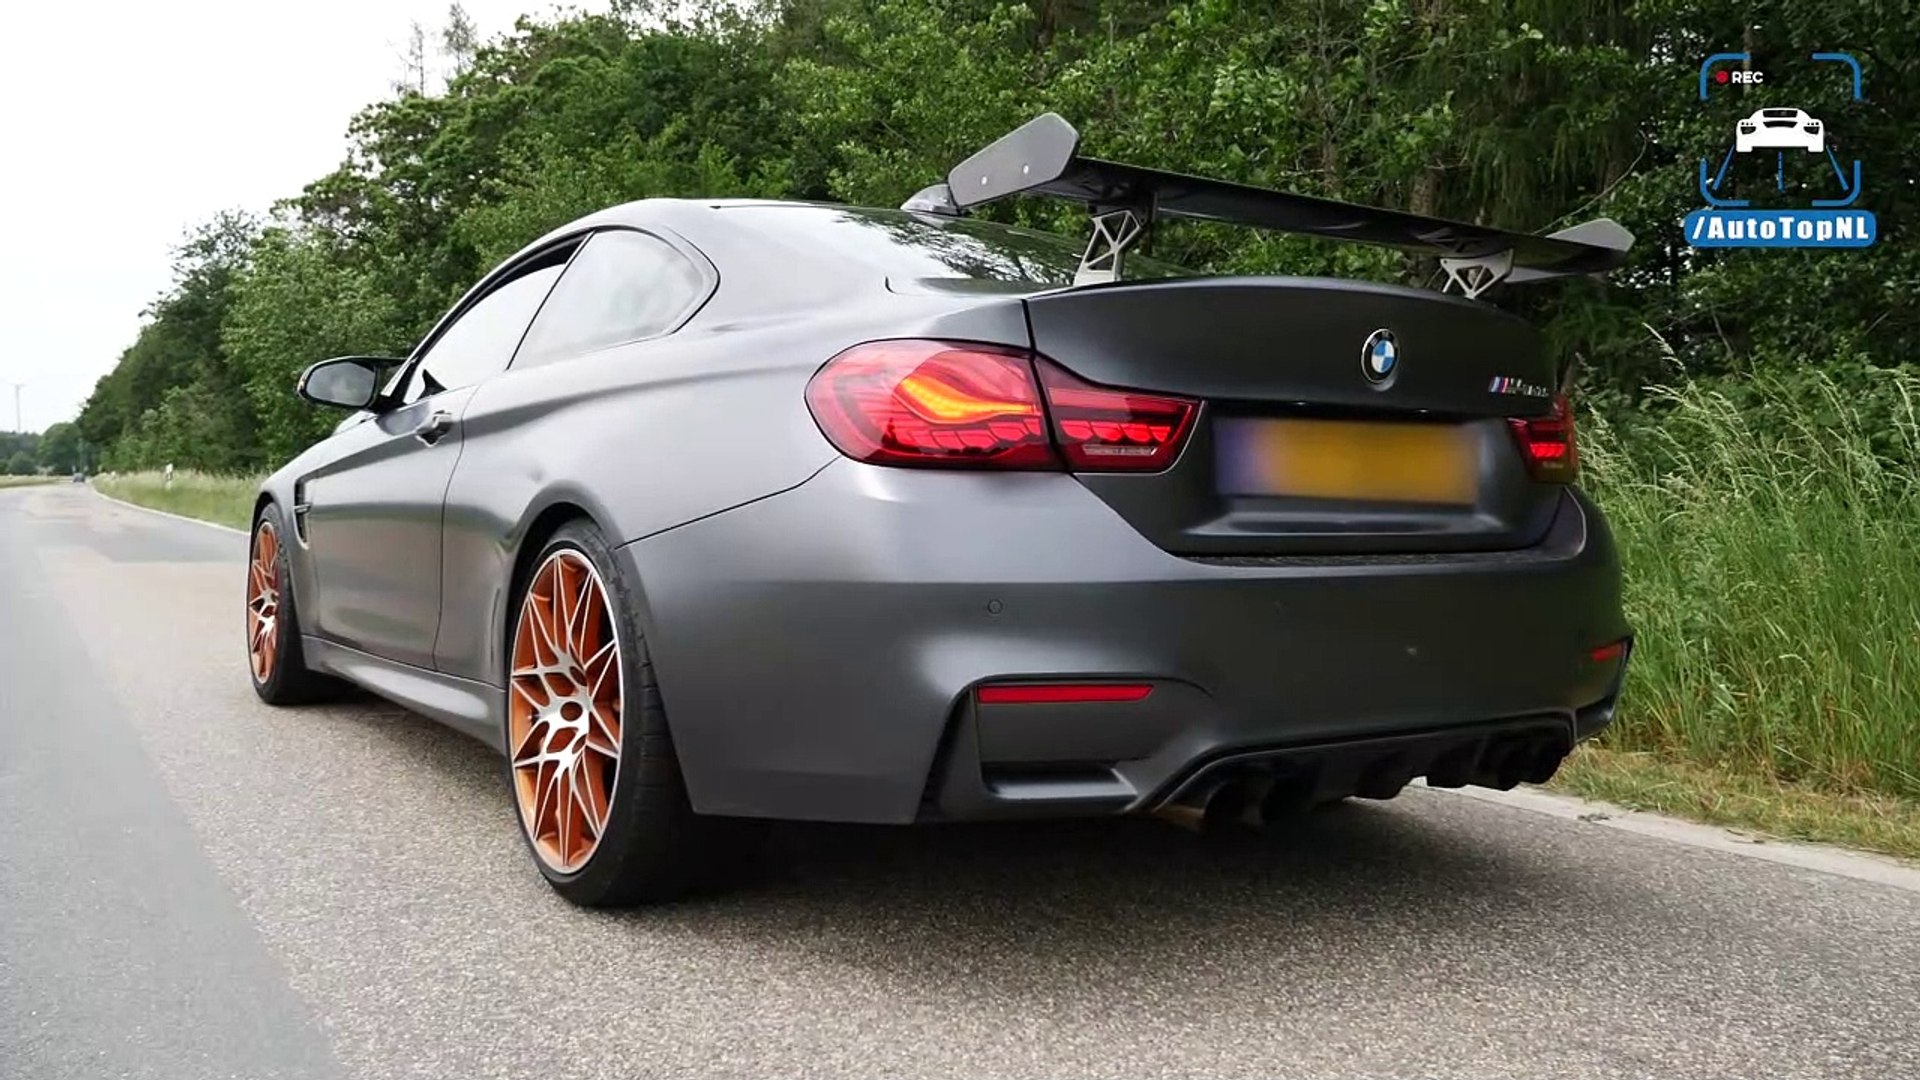 Bmw M4 Gts Super Loud Exhaust Sound Revs Onboard By Autotopnl Dailymotion Video